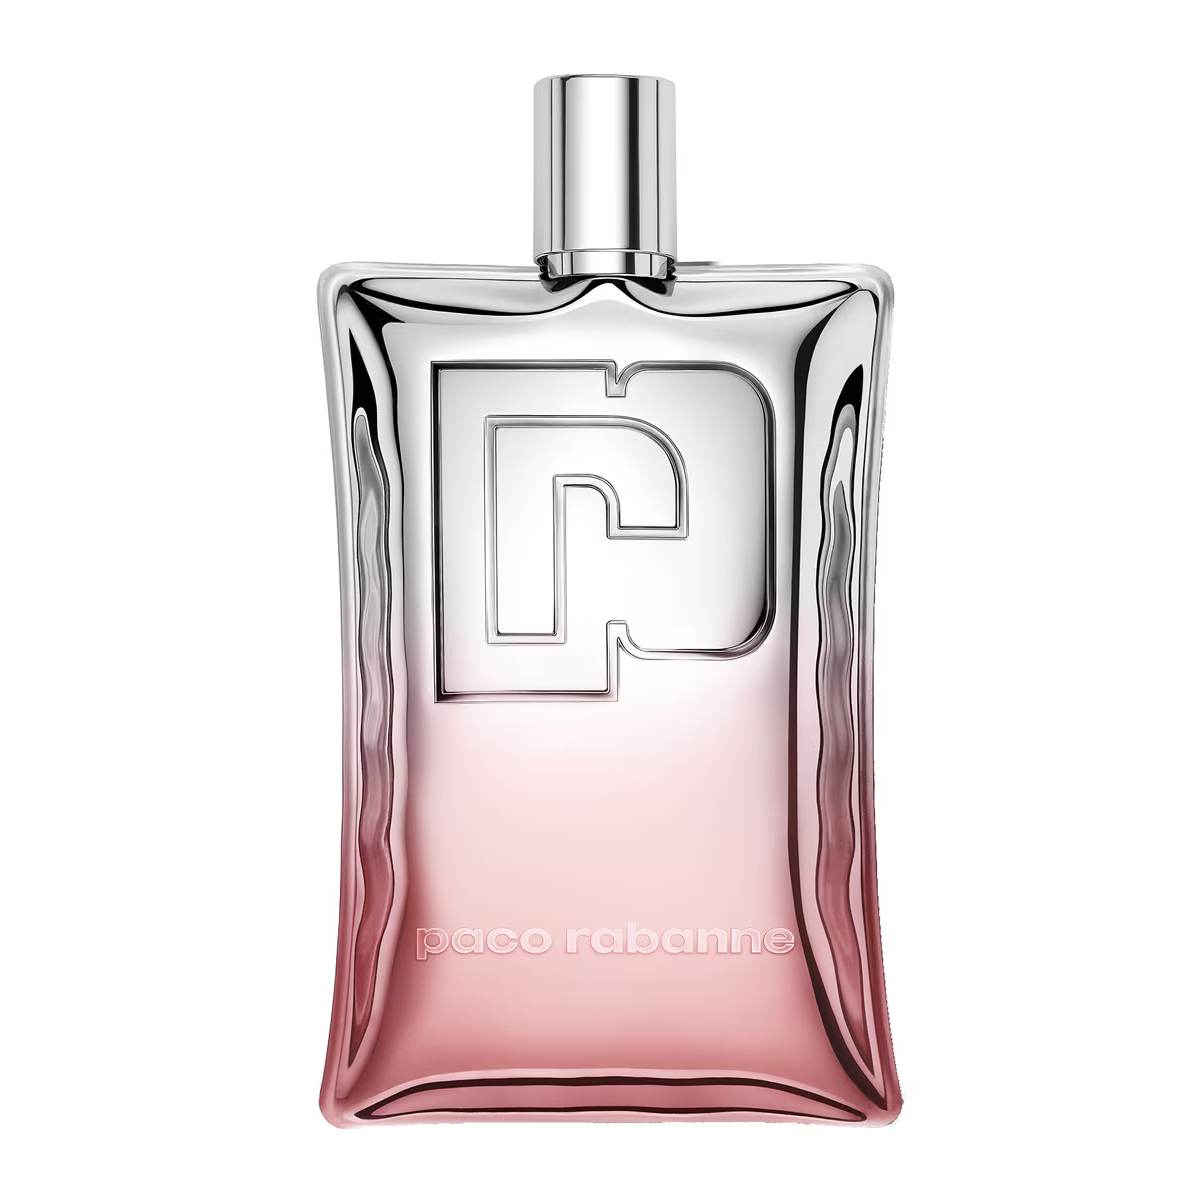 Парфюмерная вода Paco Rabanne Pacollection Blossom Me, 62 мл цена и фото